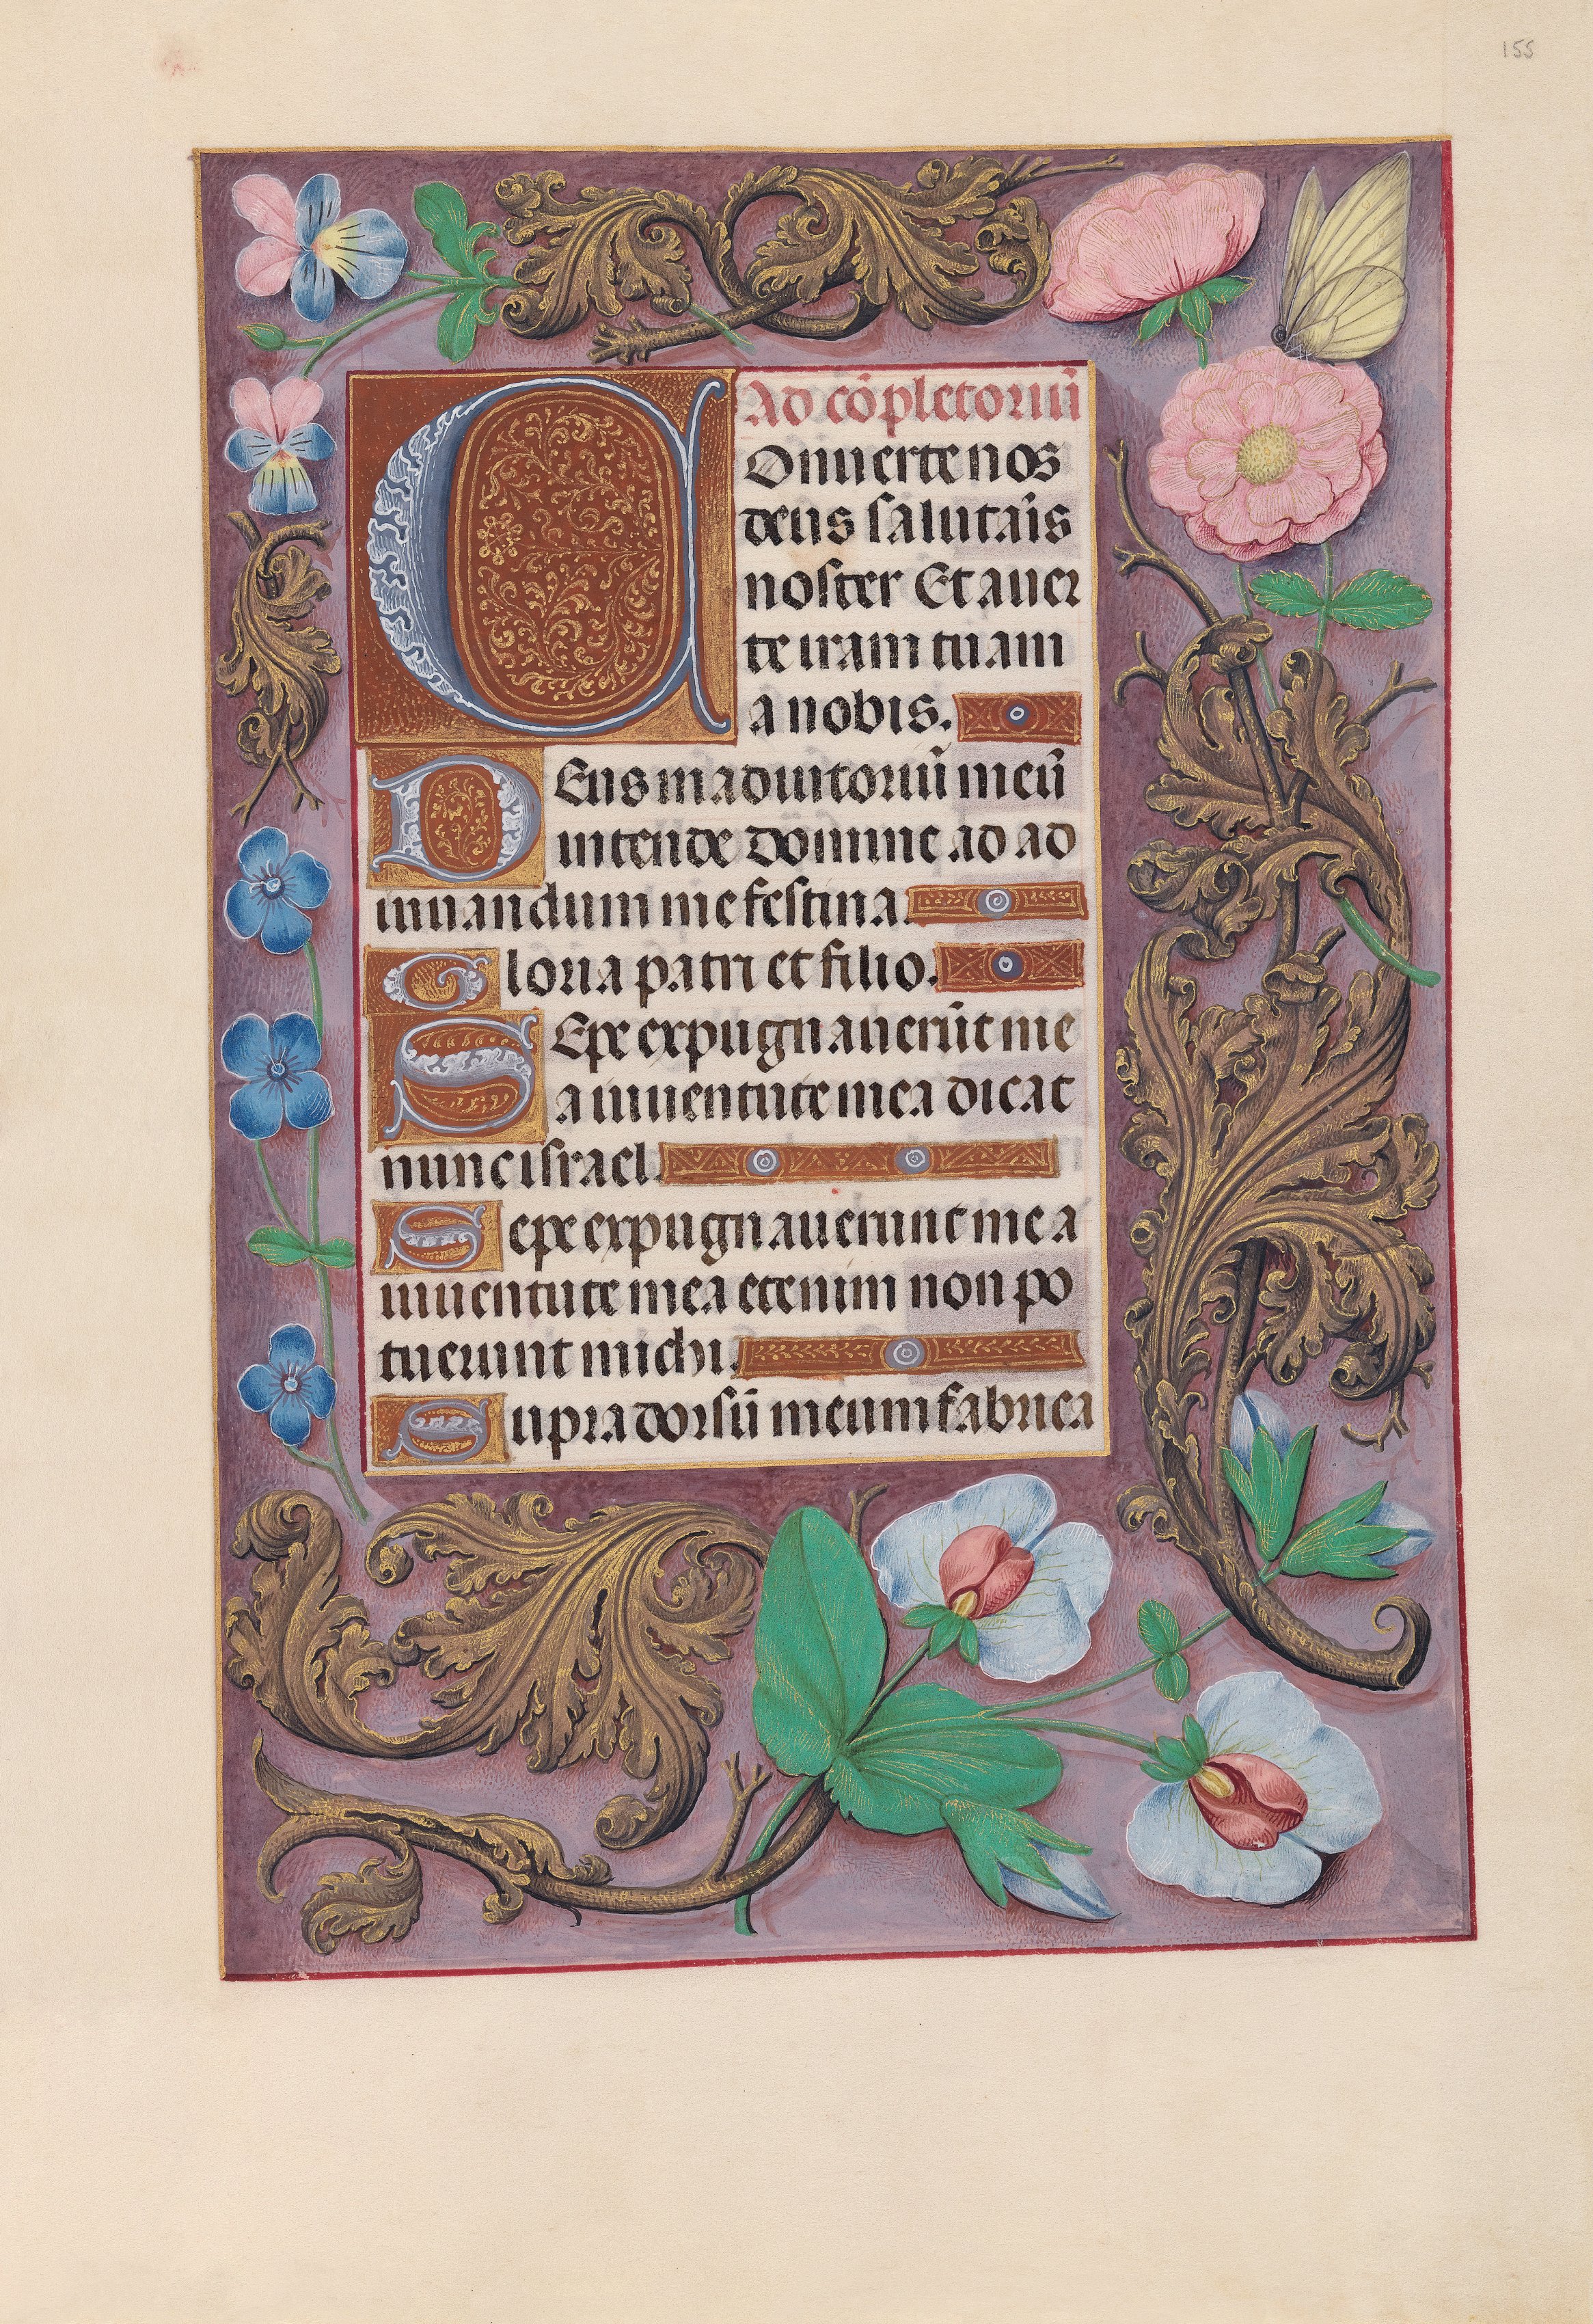 Hours of Queen Isabella the Catholic, Queen of Spain:  Fol. 155r